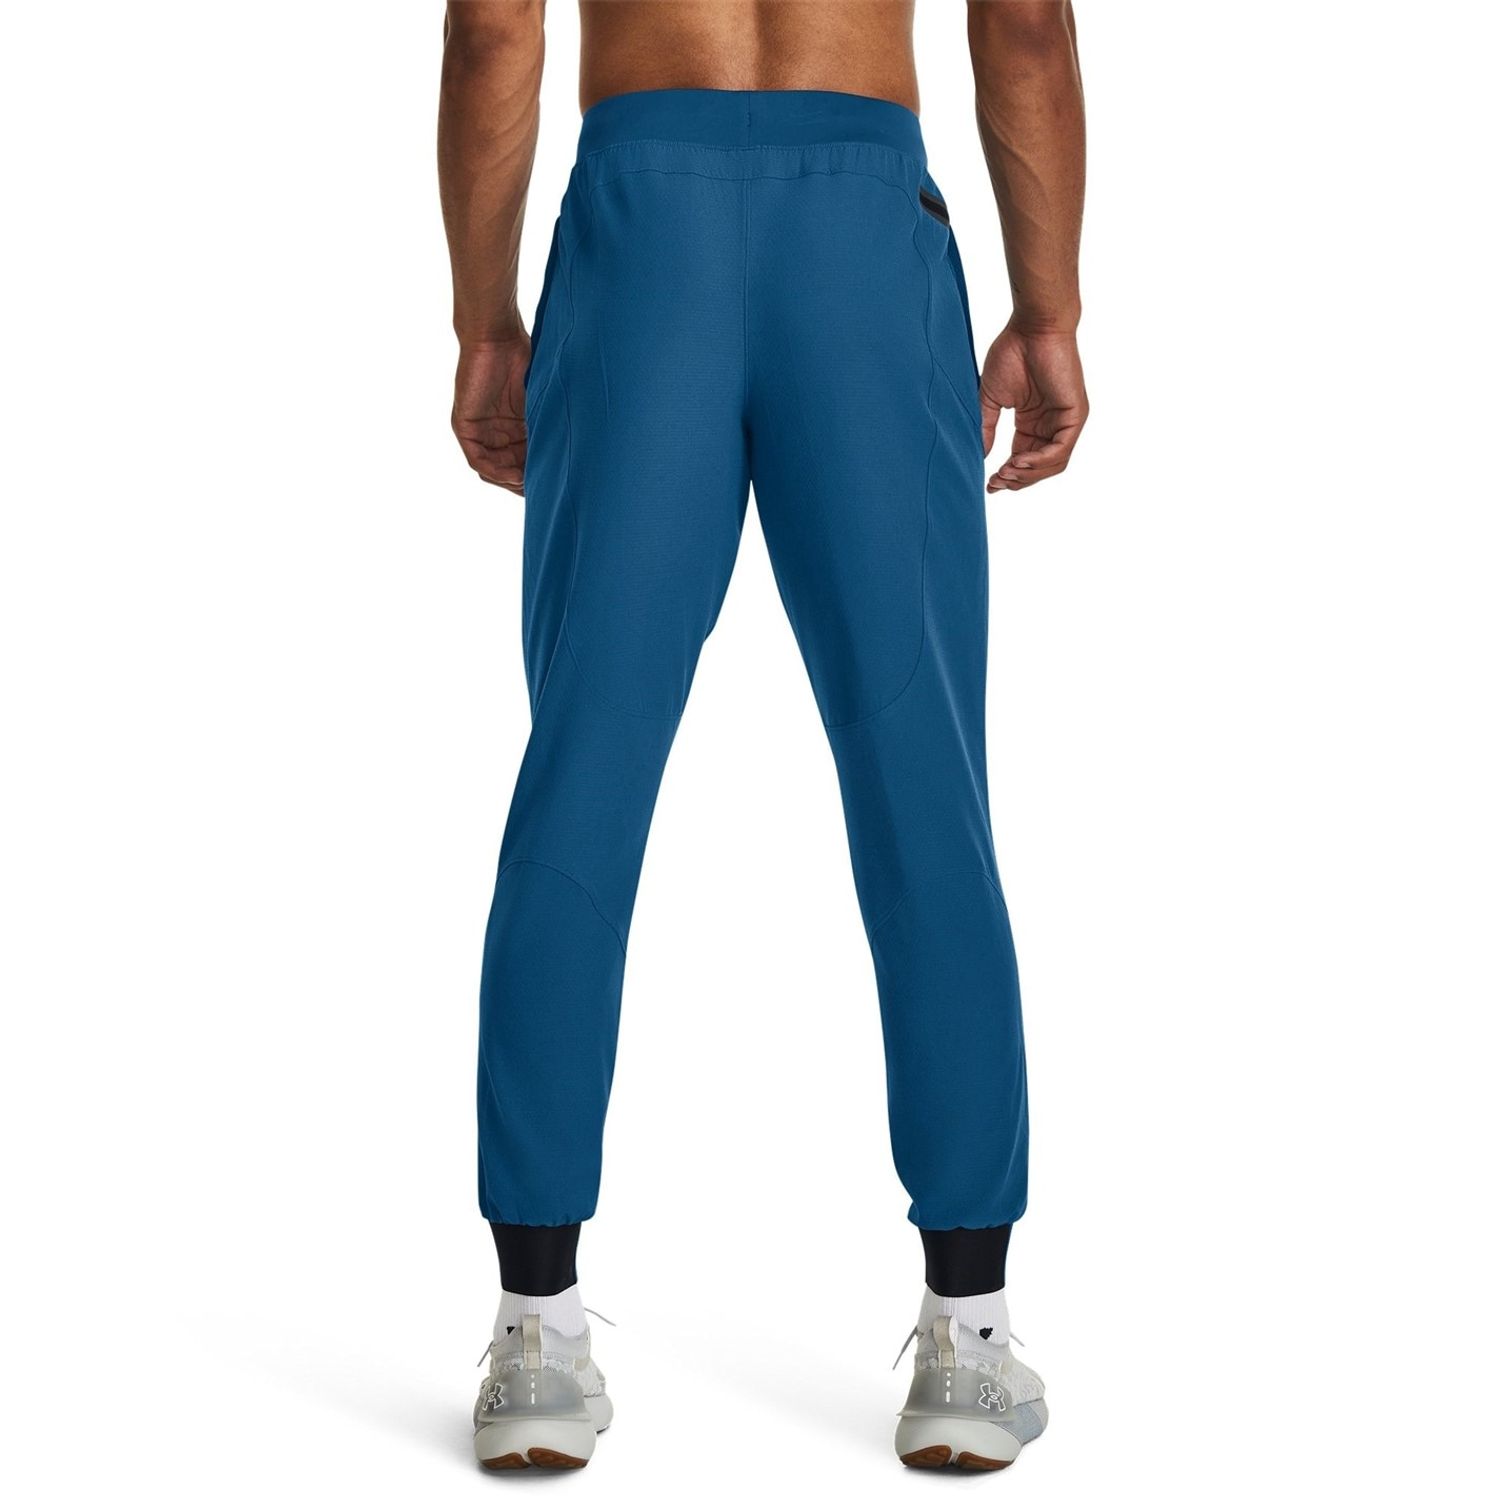 https://gtl-uk.prod.myauroraassets.com/p/583731/unstoppable-joggers-fr2915849under-armour-unstoppable-joggers-fr2915849.jpg?t=rp&w=1500&h=1500